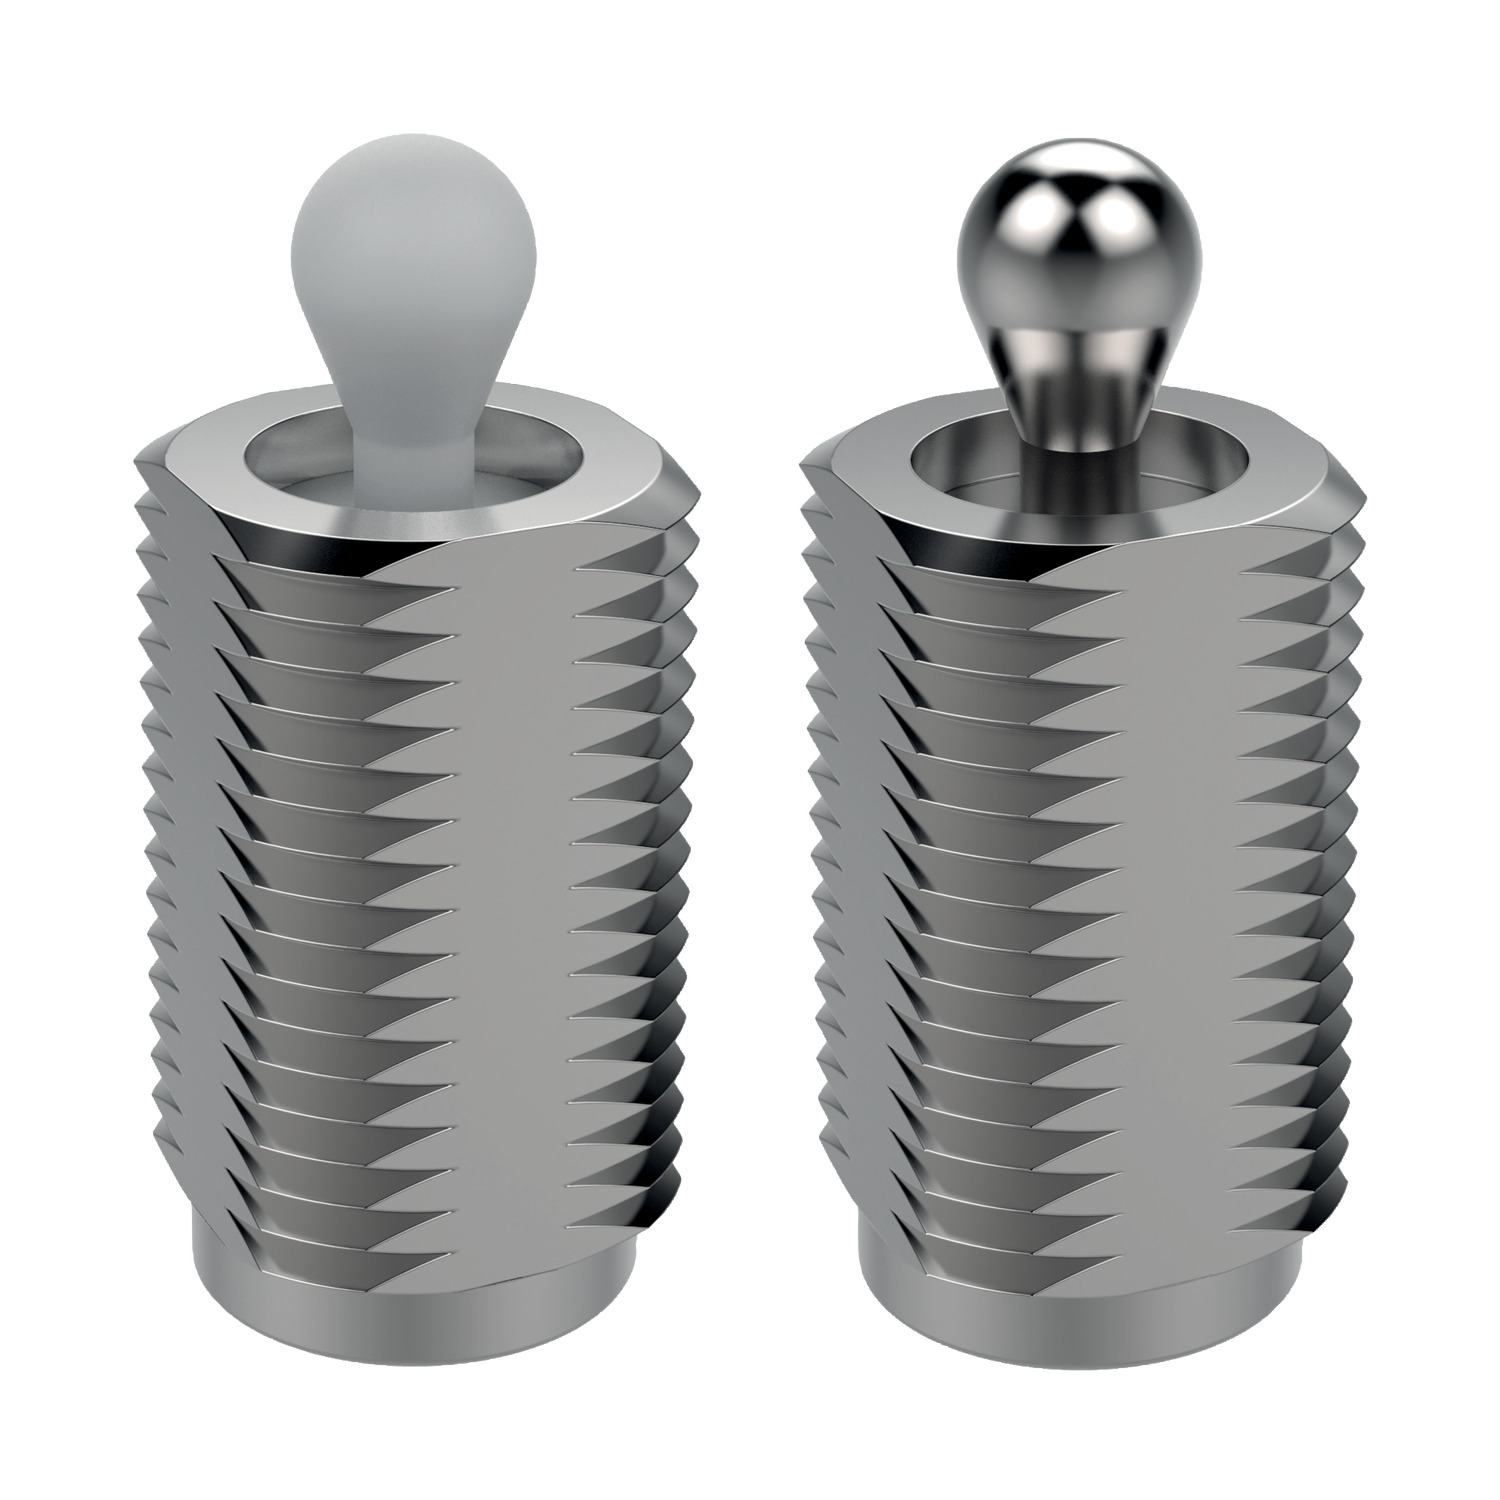 Side-Thrust Pins - Threaded A threaded alternative to push fit models for positioning and applying pressure. In sizes M12 and M18 x1.5 and is without seal.